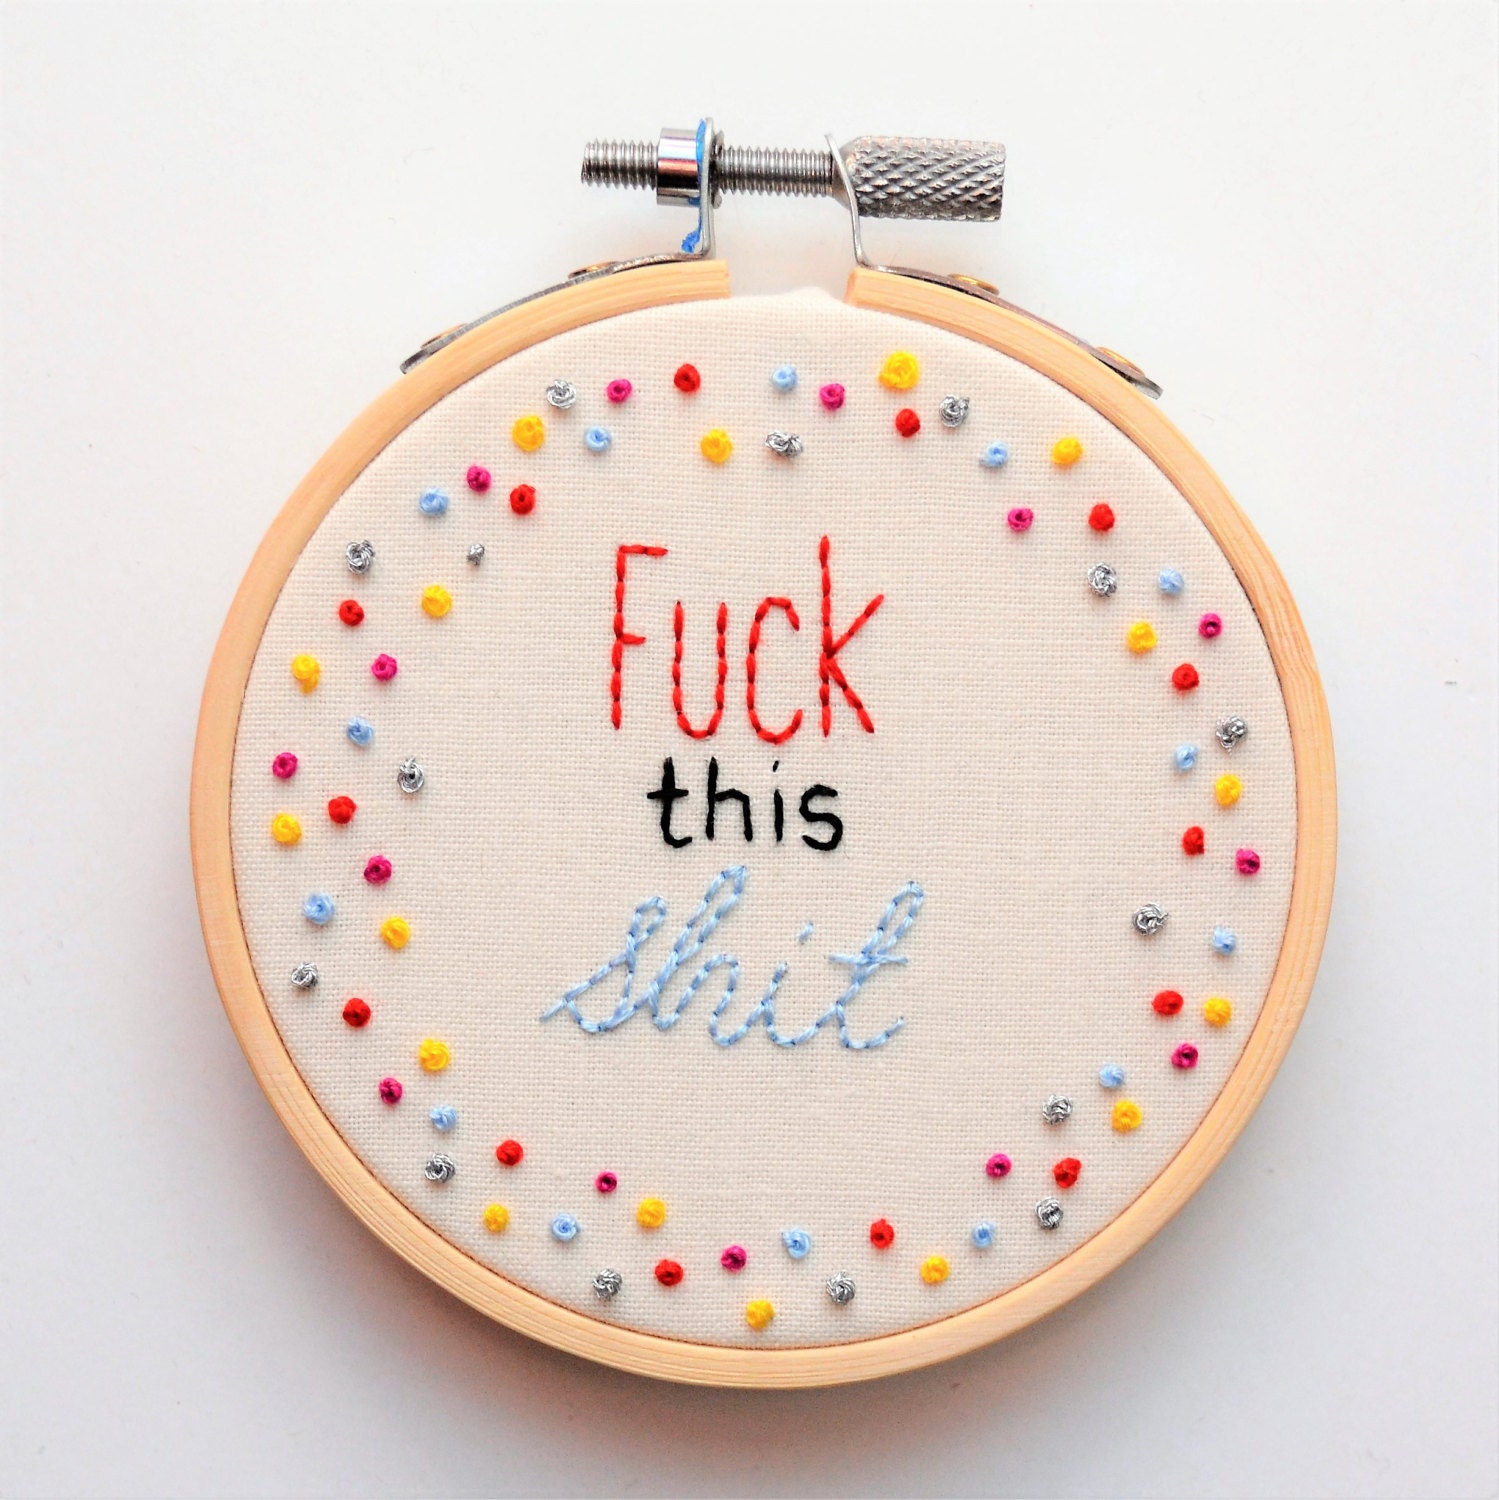 Primary Colors oh fuck Embroidery Kit - Beginner – Pretty Rude